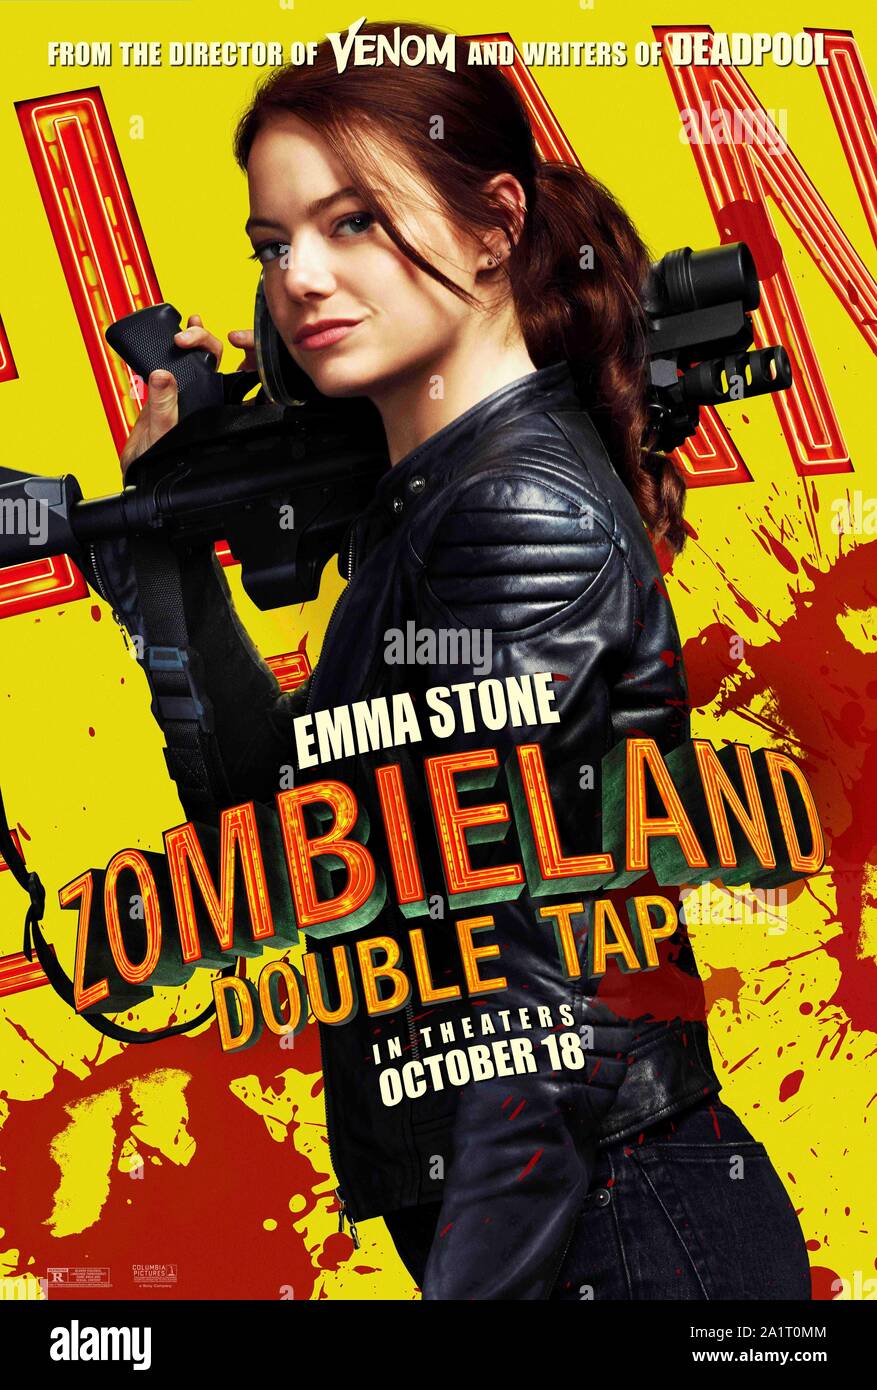 RELEASE DATE: October 18, 2019 TITLE: Zombieland 2: Double Tap STUDIO: Colombia Pictures DIRECTOR: Ruben Fleischer PLOT: Columbus, Tallahasse, Wichita, and Little Rock move to the American heartland as they face off against evolved zombies, fellow survivors, and the growing pains of the snarky makeshift family. STARRING: EMMA STONE as Wichita. (Credit Image: © Colombia Pictures/Entertainment Pictures) Stock Photo